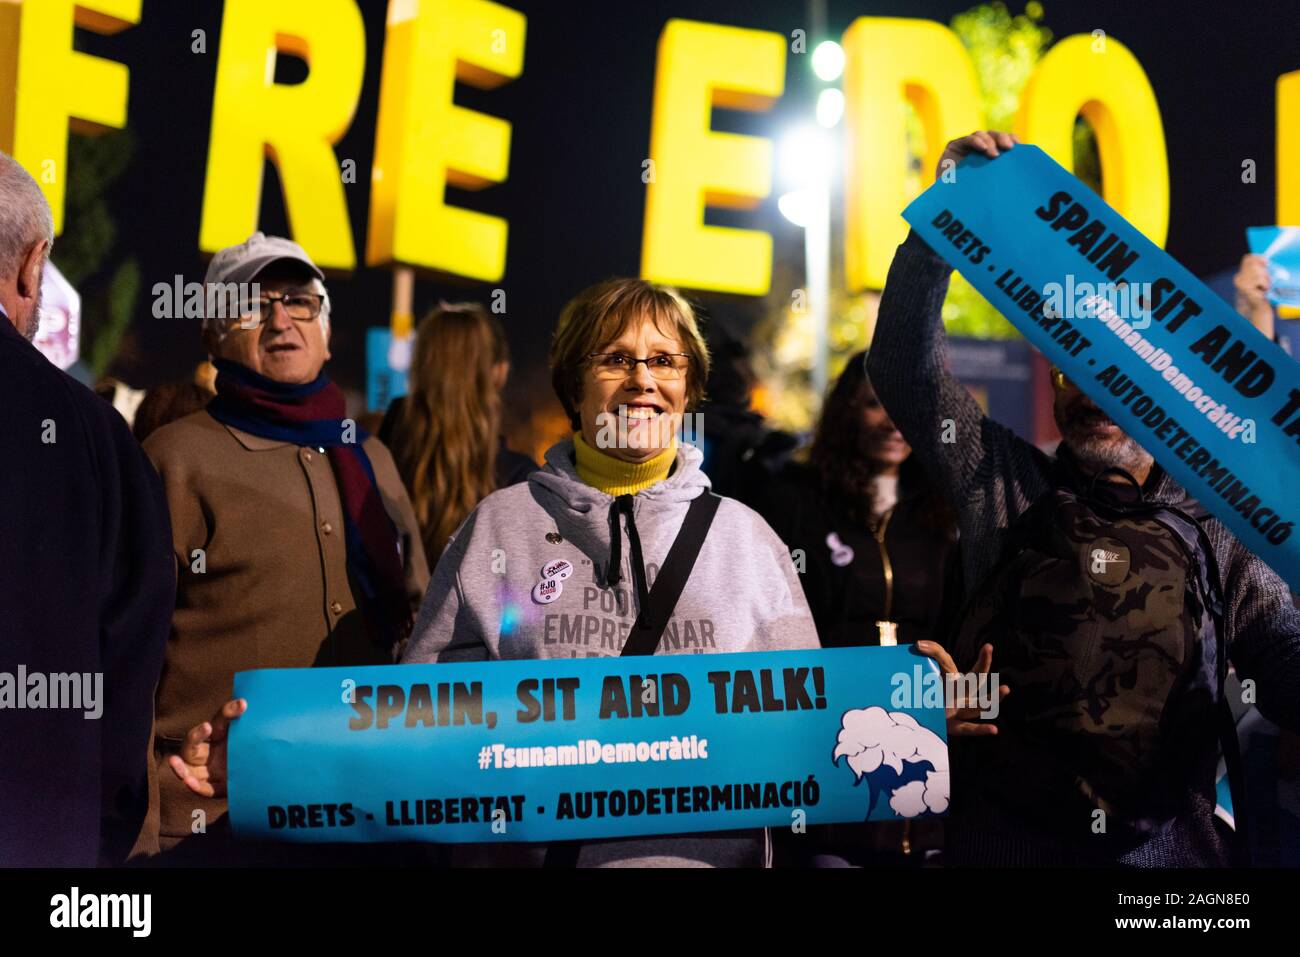 Barcelona, Spain - 18 december 2019: smiling catalan woman looks up holding spain sit and talk banner during protest for catalan independence during e Stock Photo